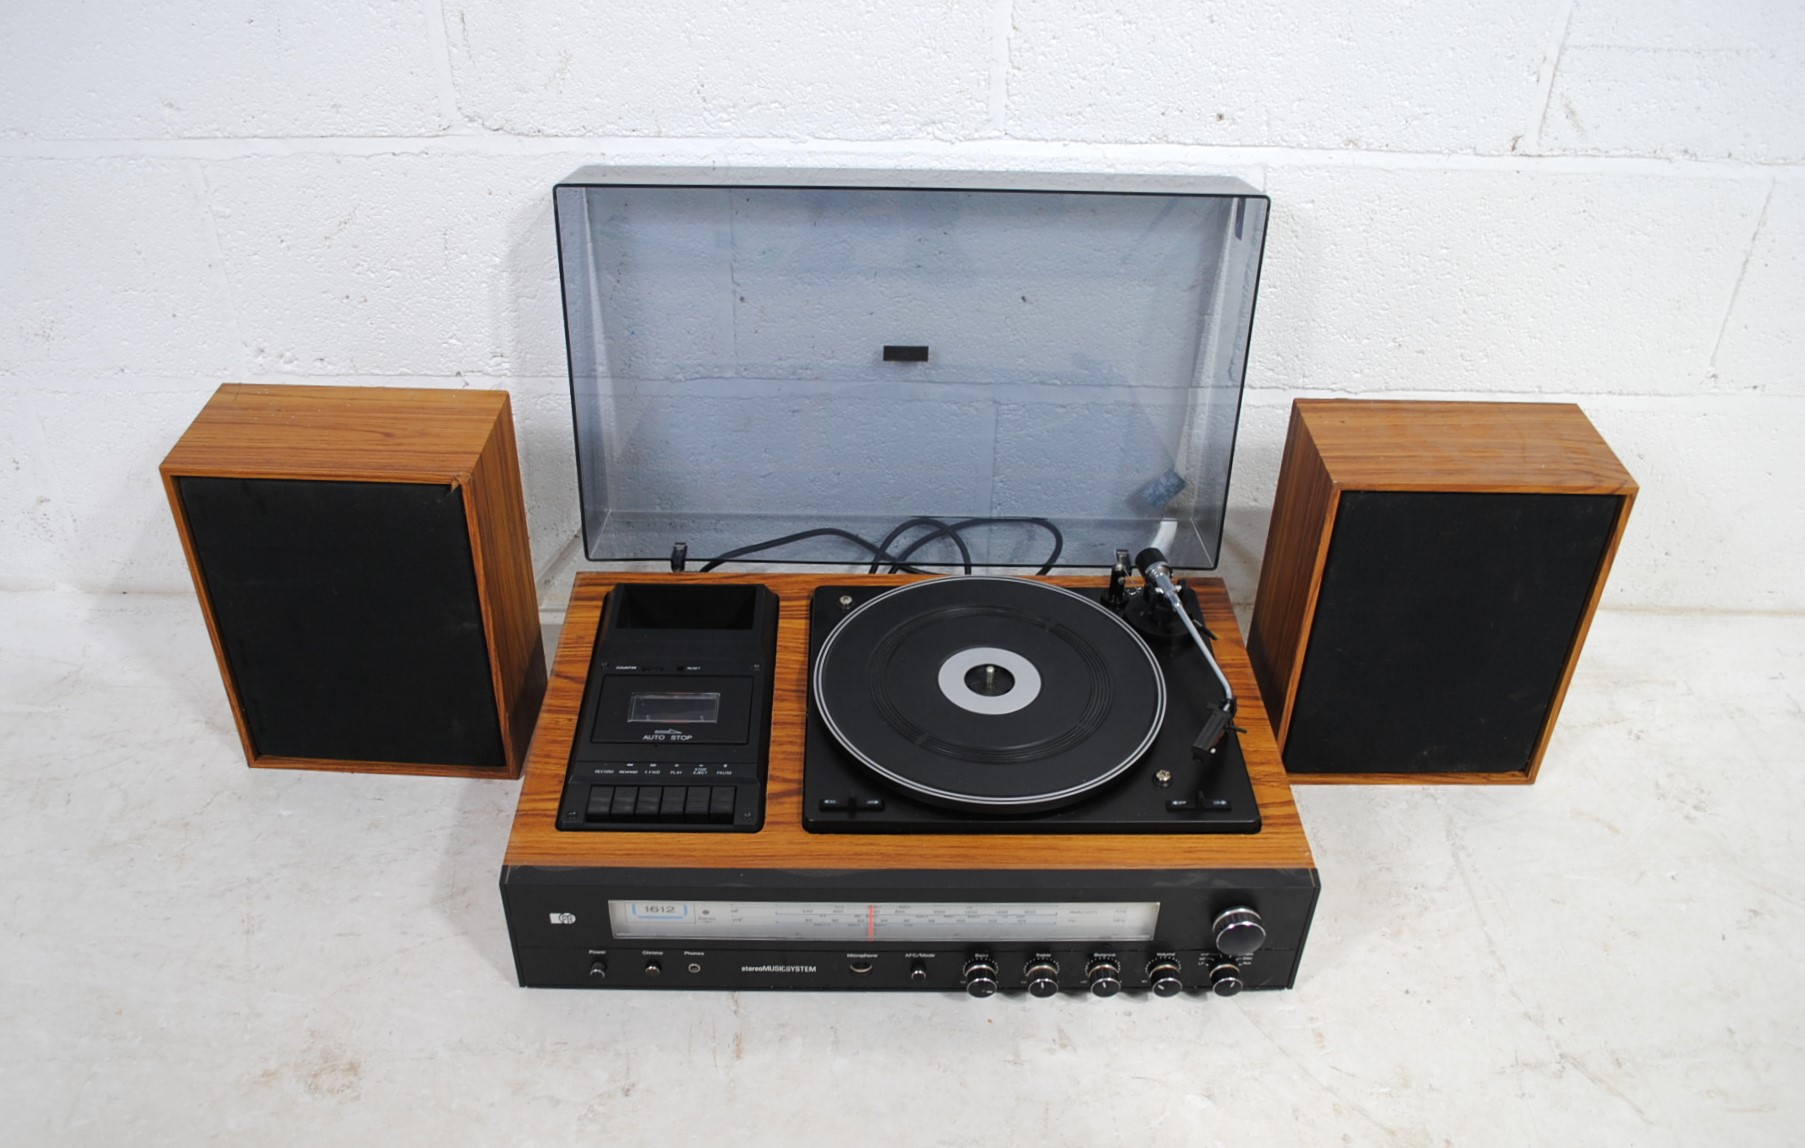 A vintage Pye 1612 stereo music system, including a pair of Pye 5780 8ohm bookshelf speakers - Image 5 of 11